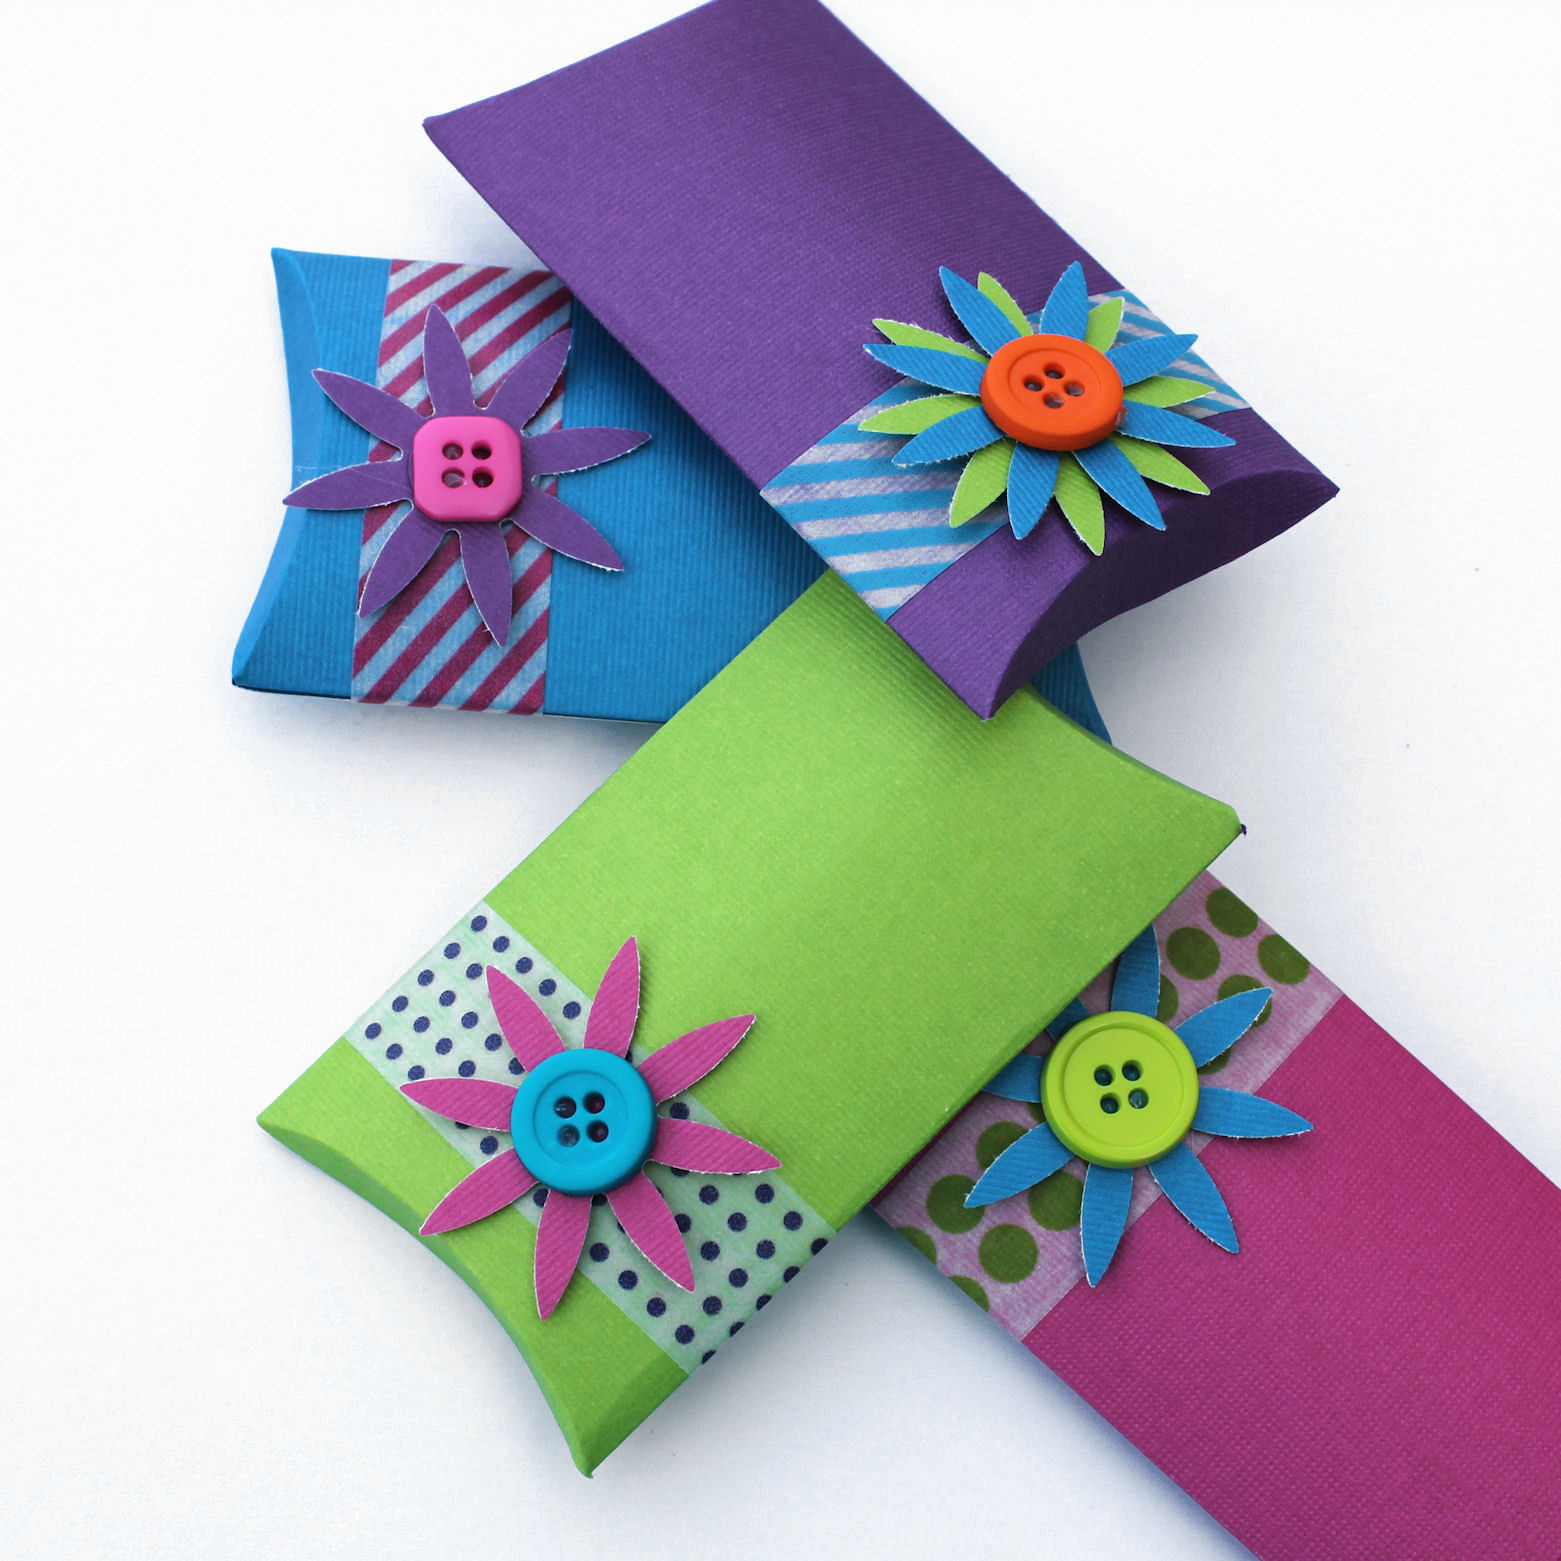 DIY Gift Boxes
 Best DIY Jewelry Card and Gift Box Tutorials